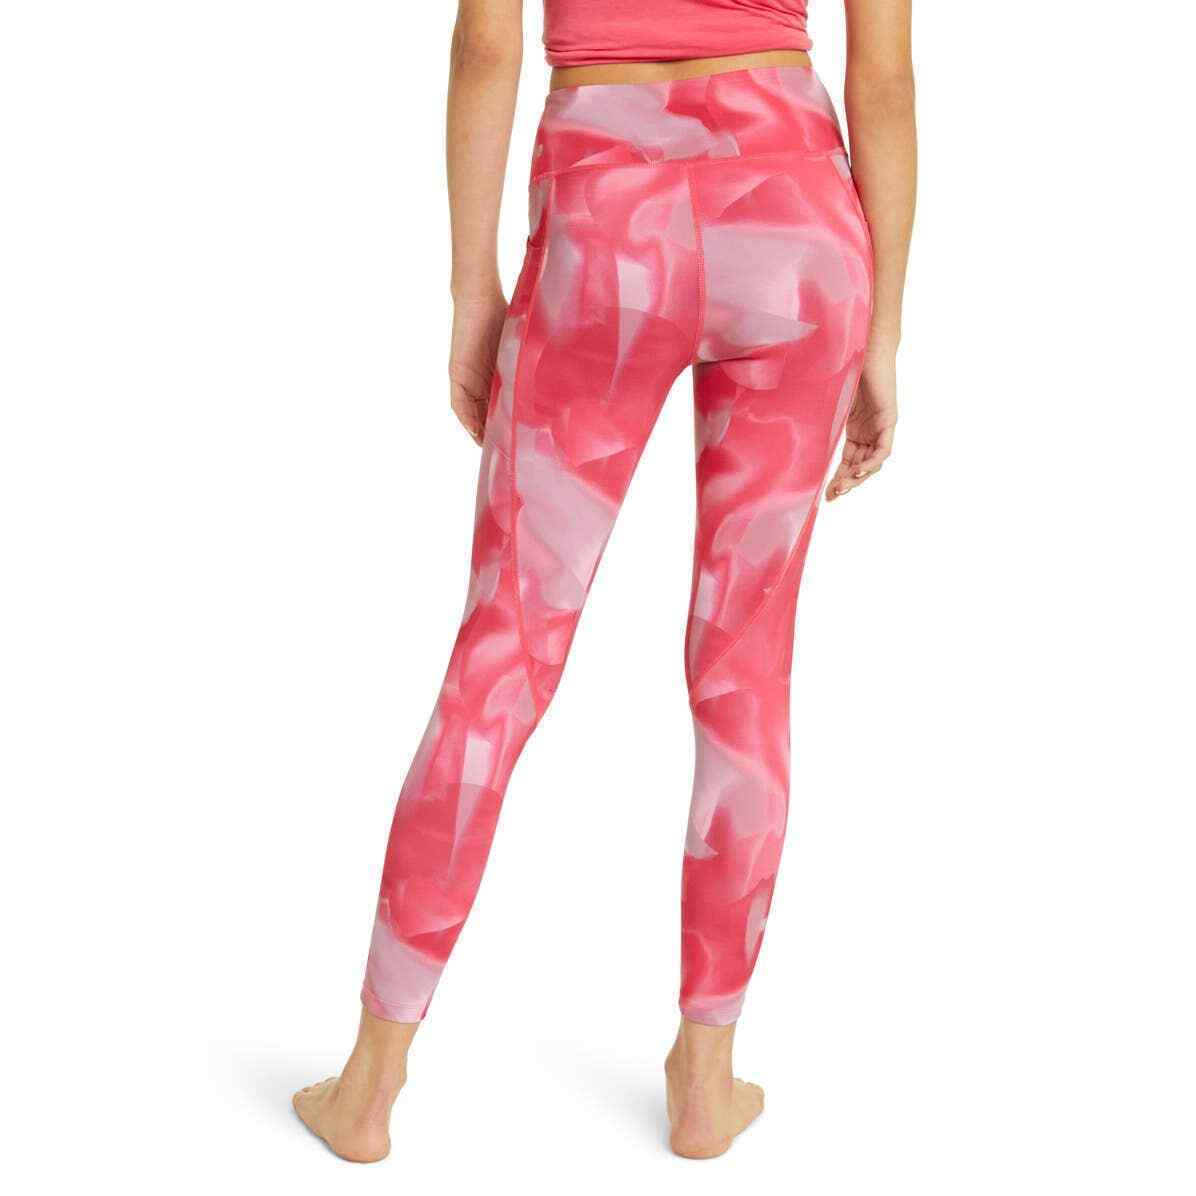 New Zella Nordstrom High Waist Leggings Pink Atomic Color Clouds Women's  Size M